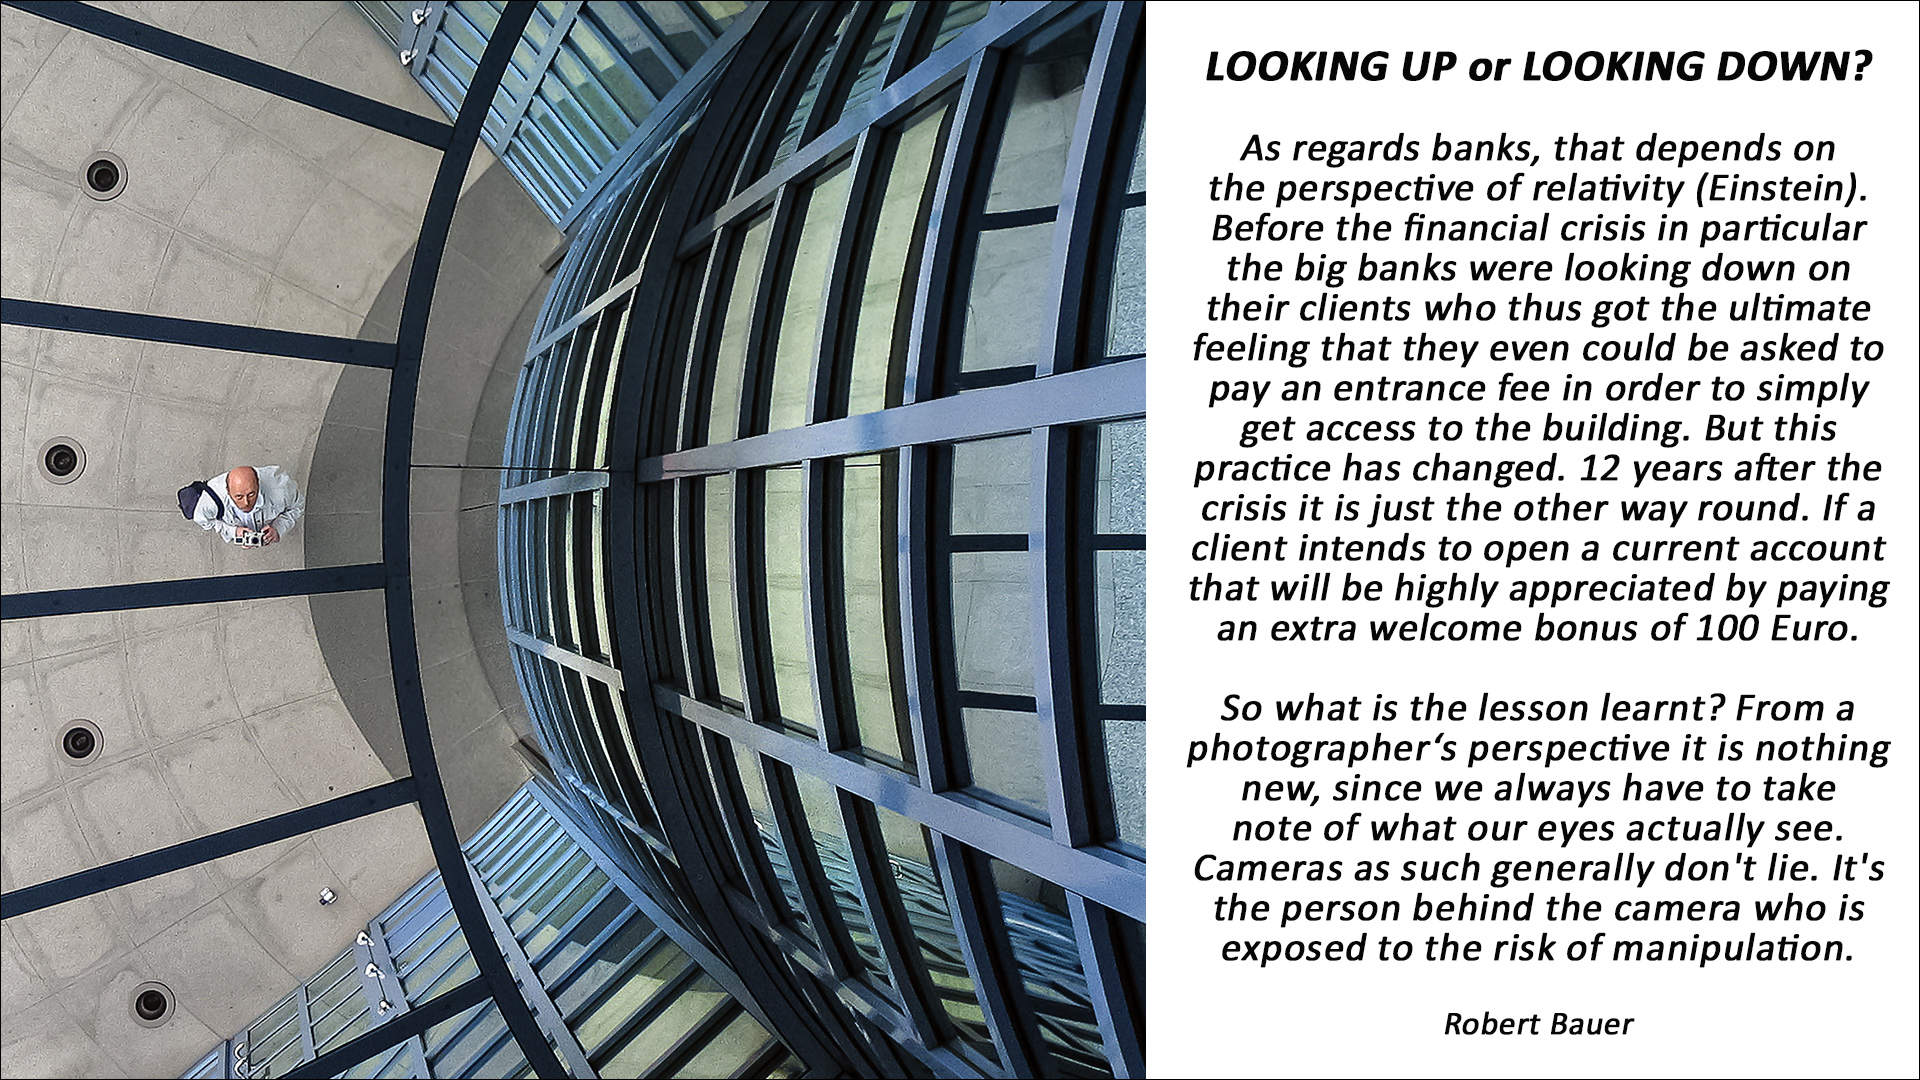 LOOKING-UP-OR-LOOKING-DOWN - a big bank's perspective.